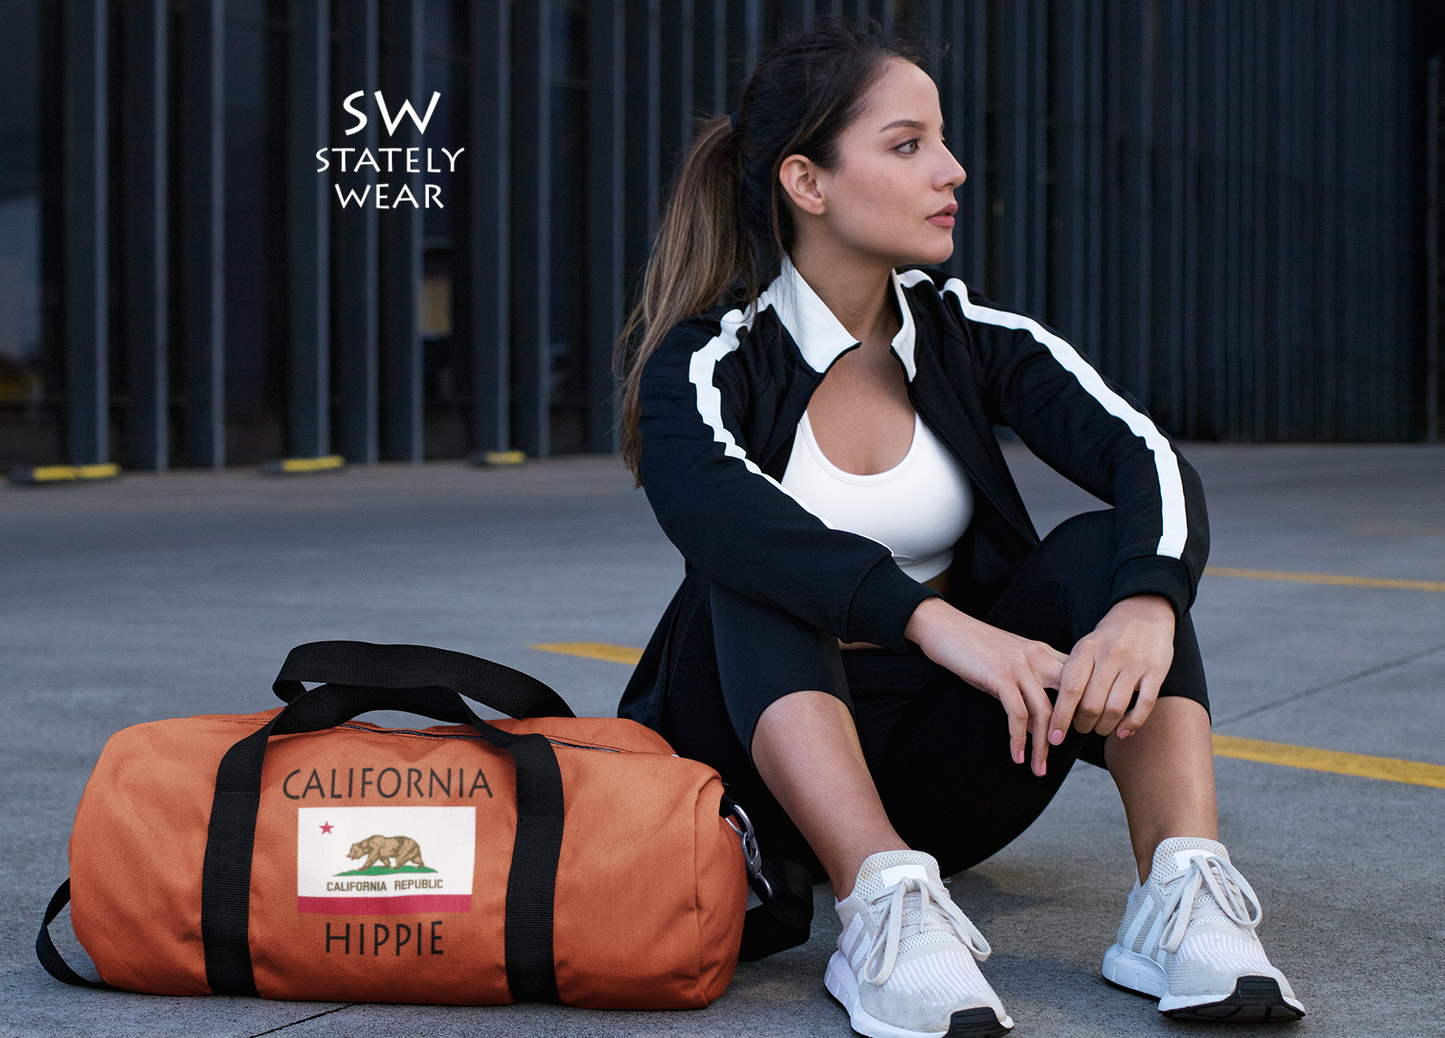 Stately Wear's California Flag Hippie duffel bag. We are a Katie Couric Shop partner. The perfect accessory as a beach bag, ski bag, travel bag & gym or yoga bag. Custom made one-at-a-time. Environmentally friendly. Biodegradable inks & dyes. Good for the planet. 2 sizes to choose.